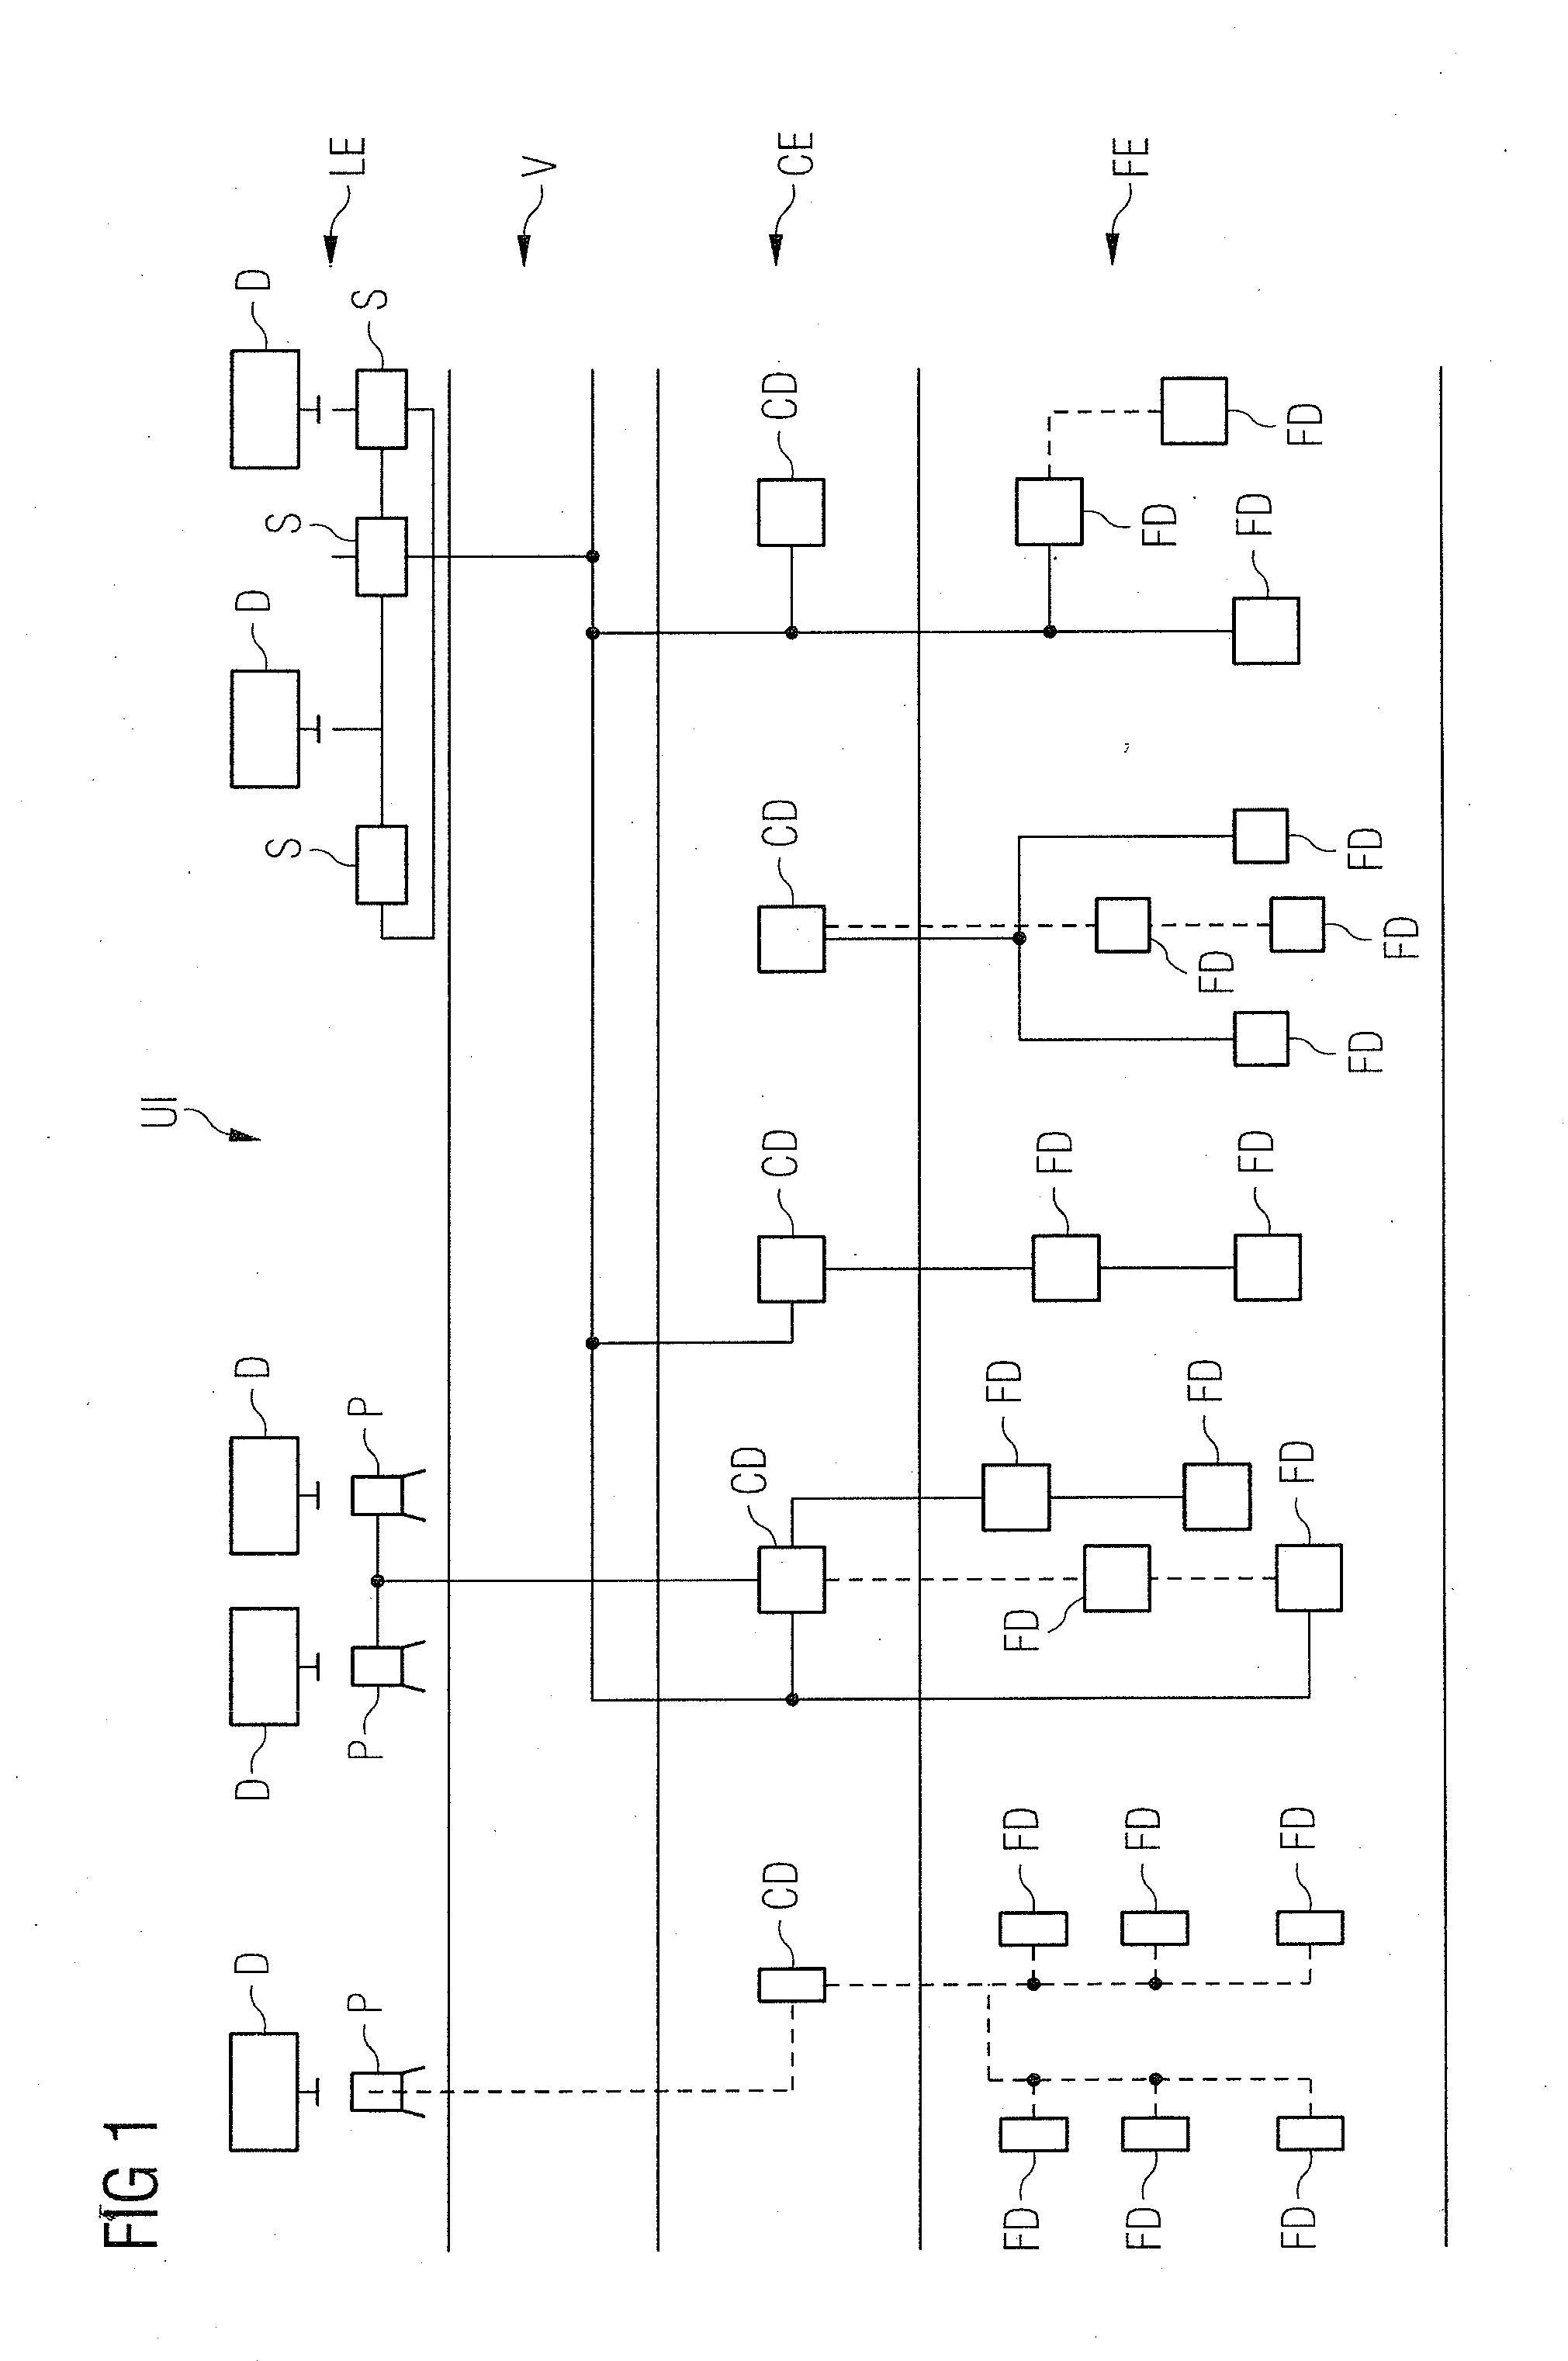 Method for Computer-Aided Analysis of an Automation Plant